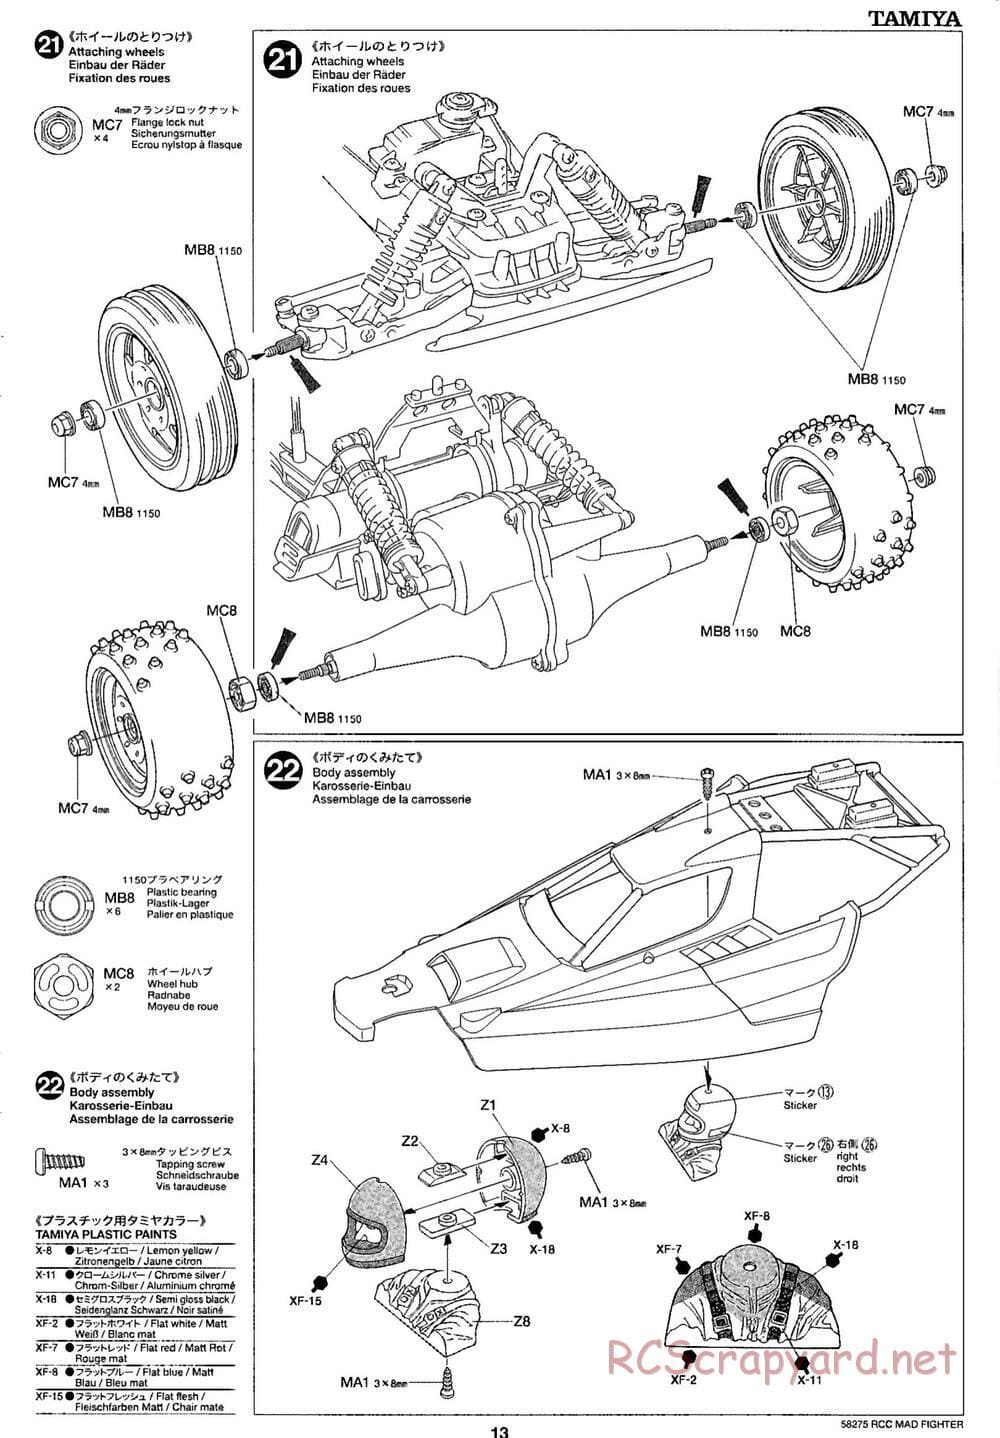 Tamiya - Mad Fighter Chassis - Manual - Page 13